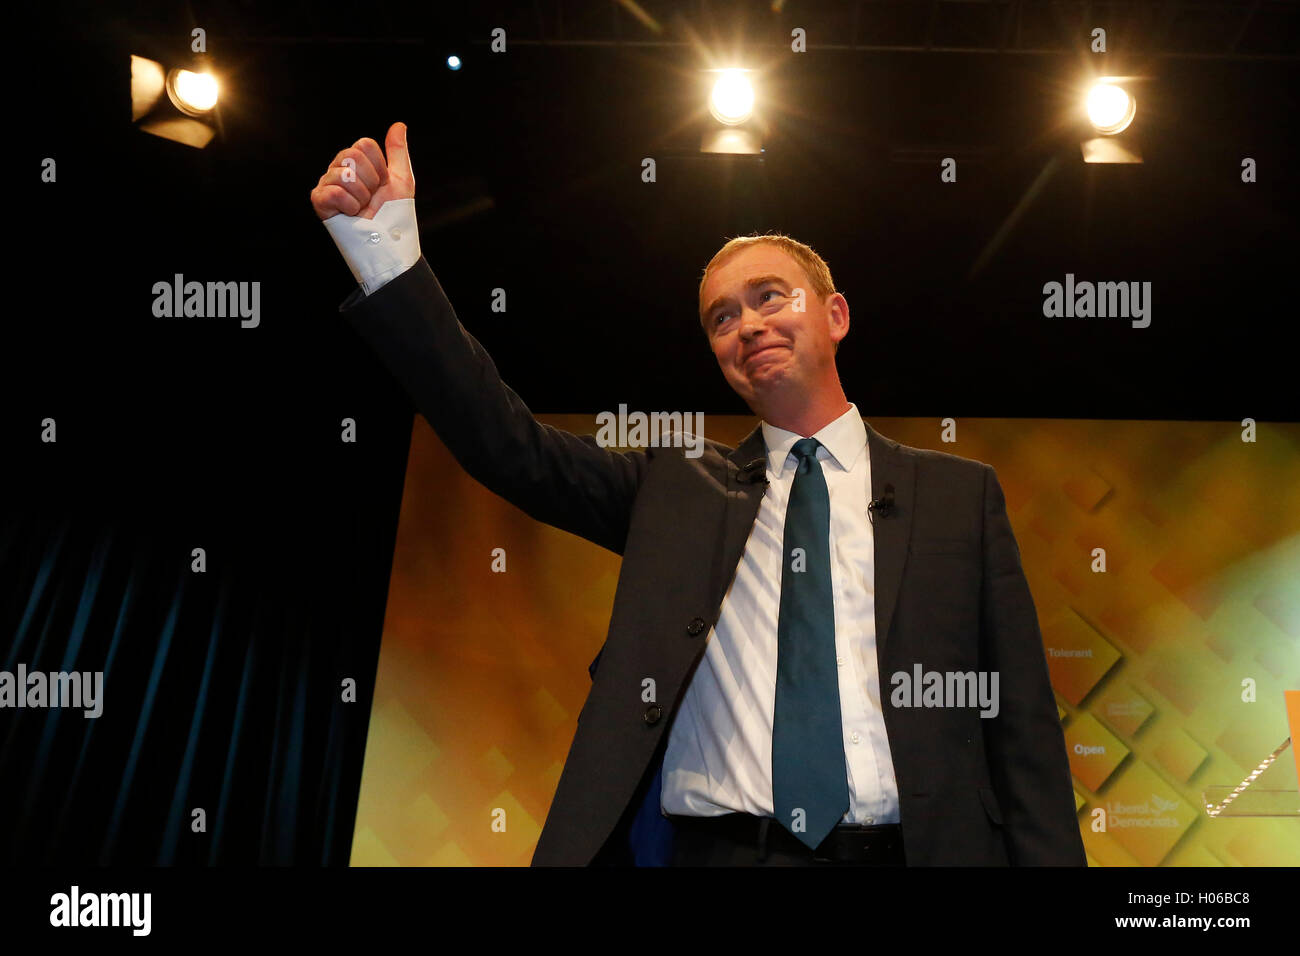 Brighton, UK. 20th Sep, 2016. Tim Farron, Party Leader waves at the close of his keynote speech during the Liberal Democrats Autumn Conference at Brighton, UK, Tuesday September 20, 2016.       Credit:  Luke MacGregor/Alamy Live News Stock Photo